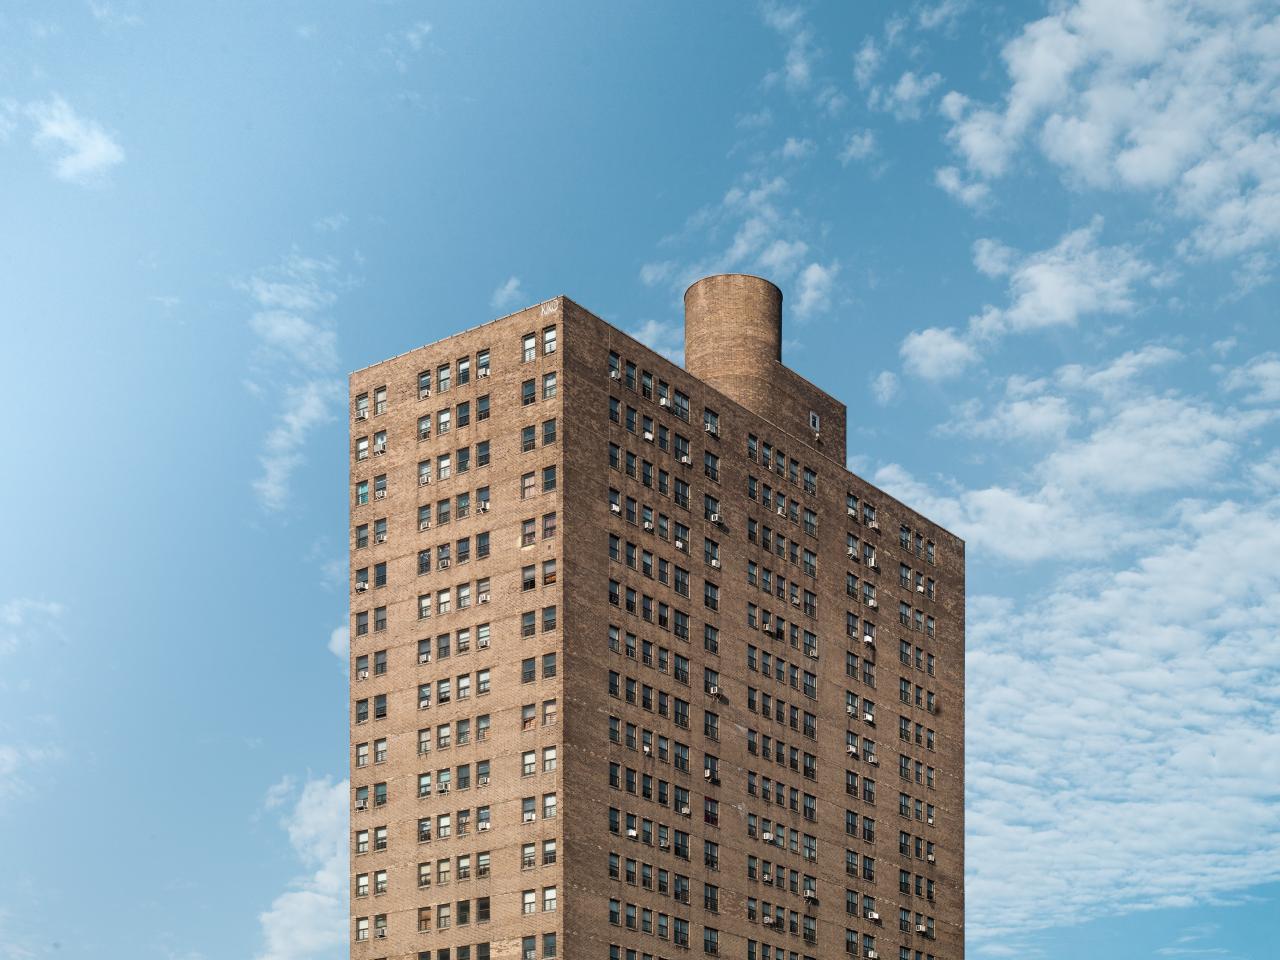 The top half of a simple brick high rise apartment complex against a blue sky